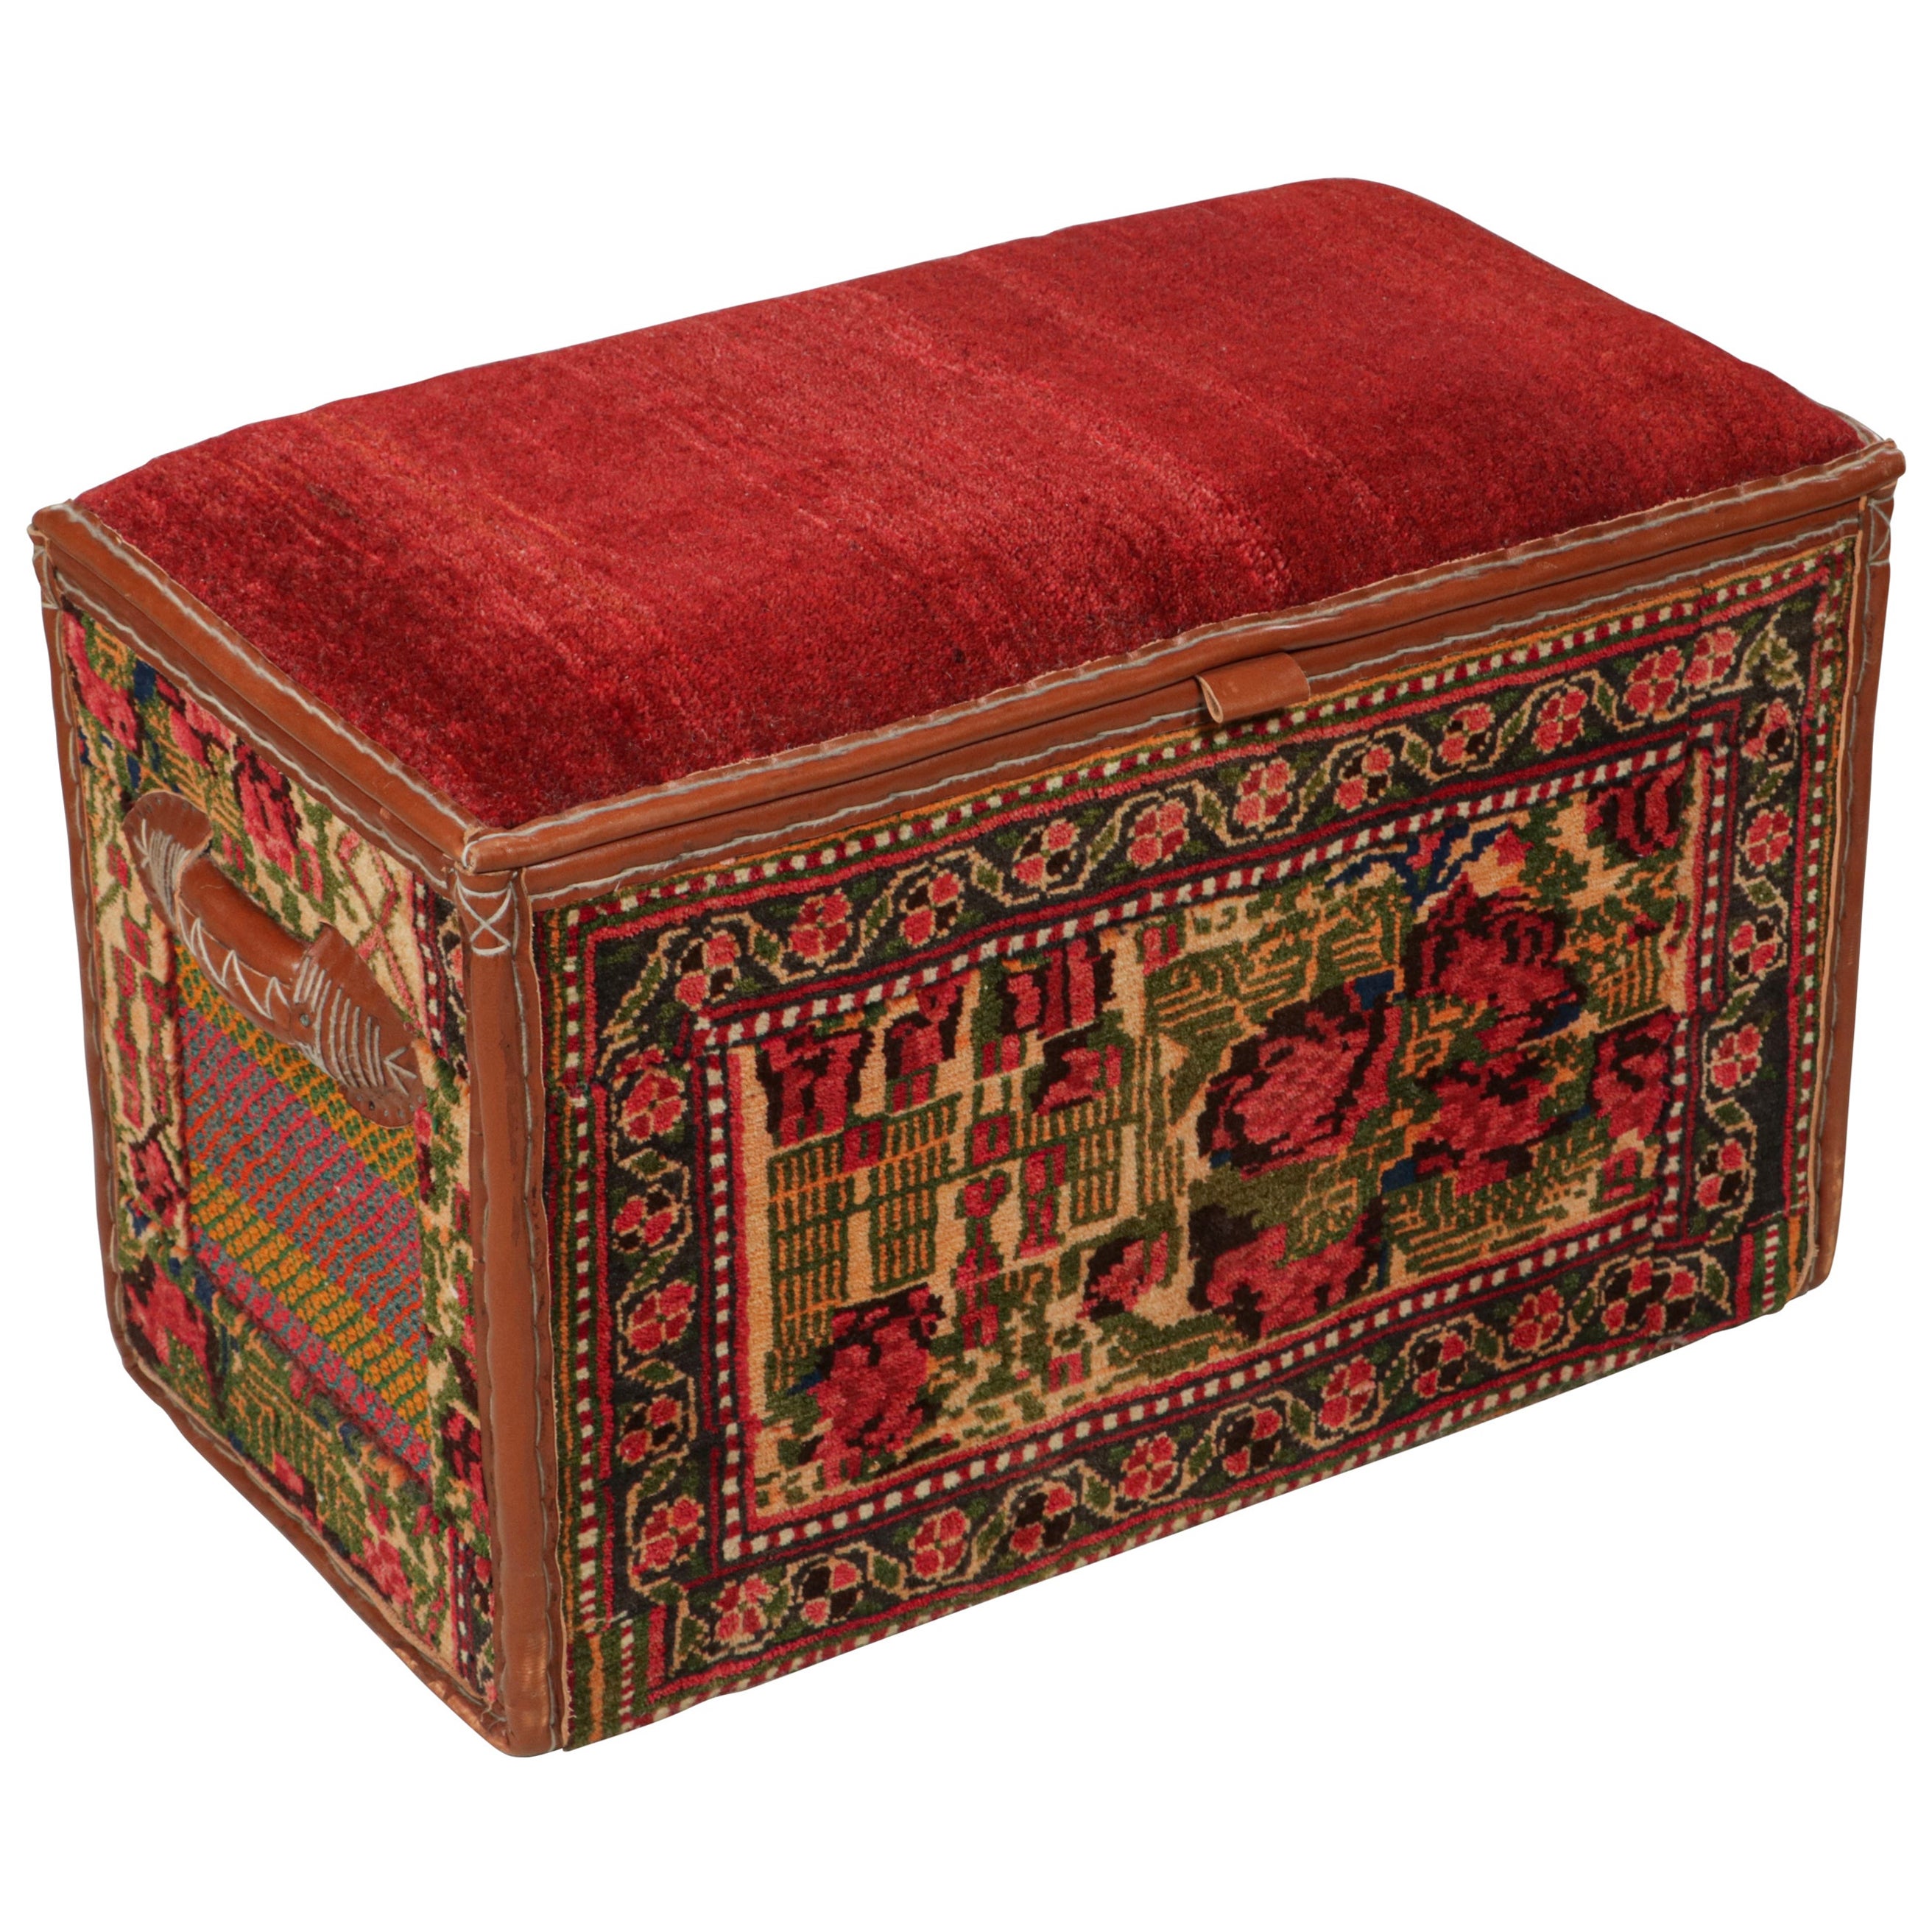 Rug & Kilim’s Persian Tribal Storage Chest with Colorful Geometric Patterns For Sale